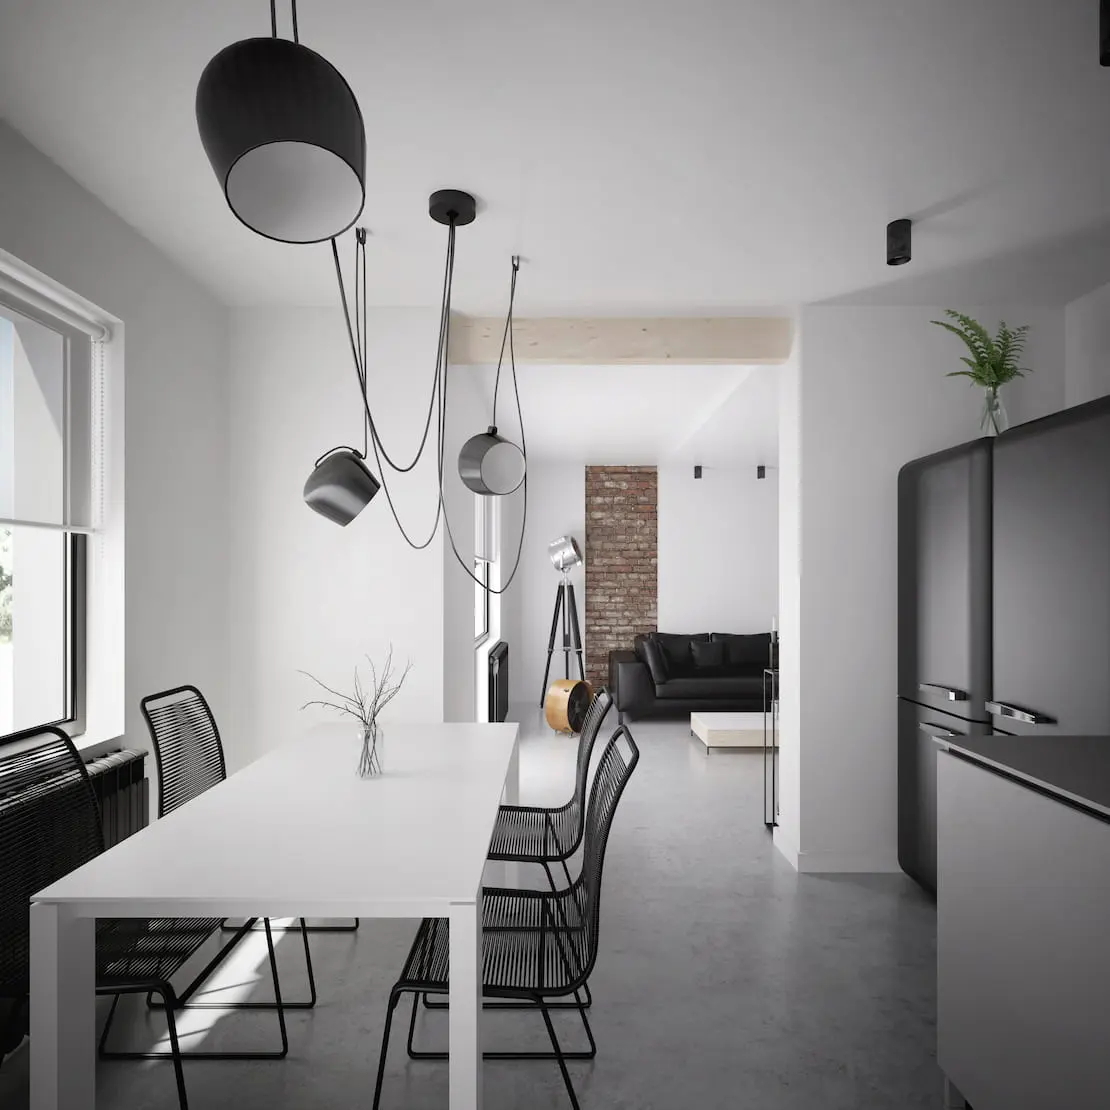 Microcement in kitchen with black and white details